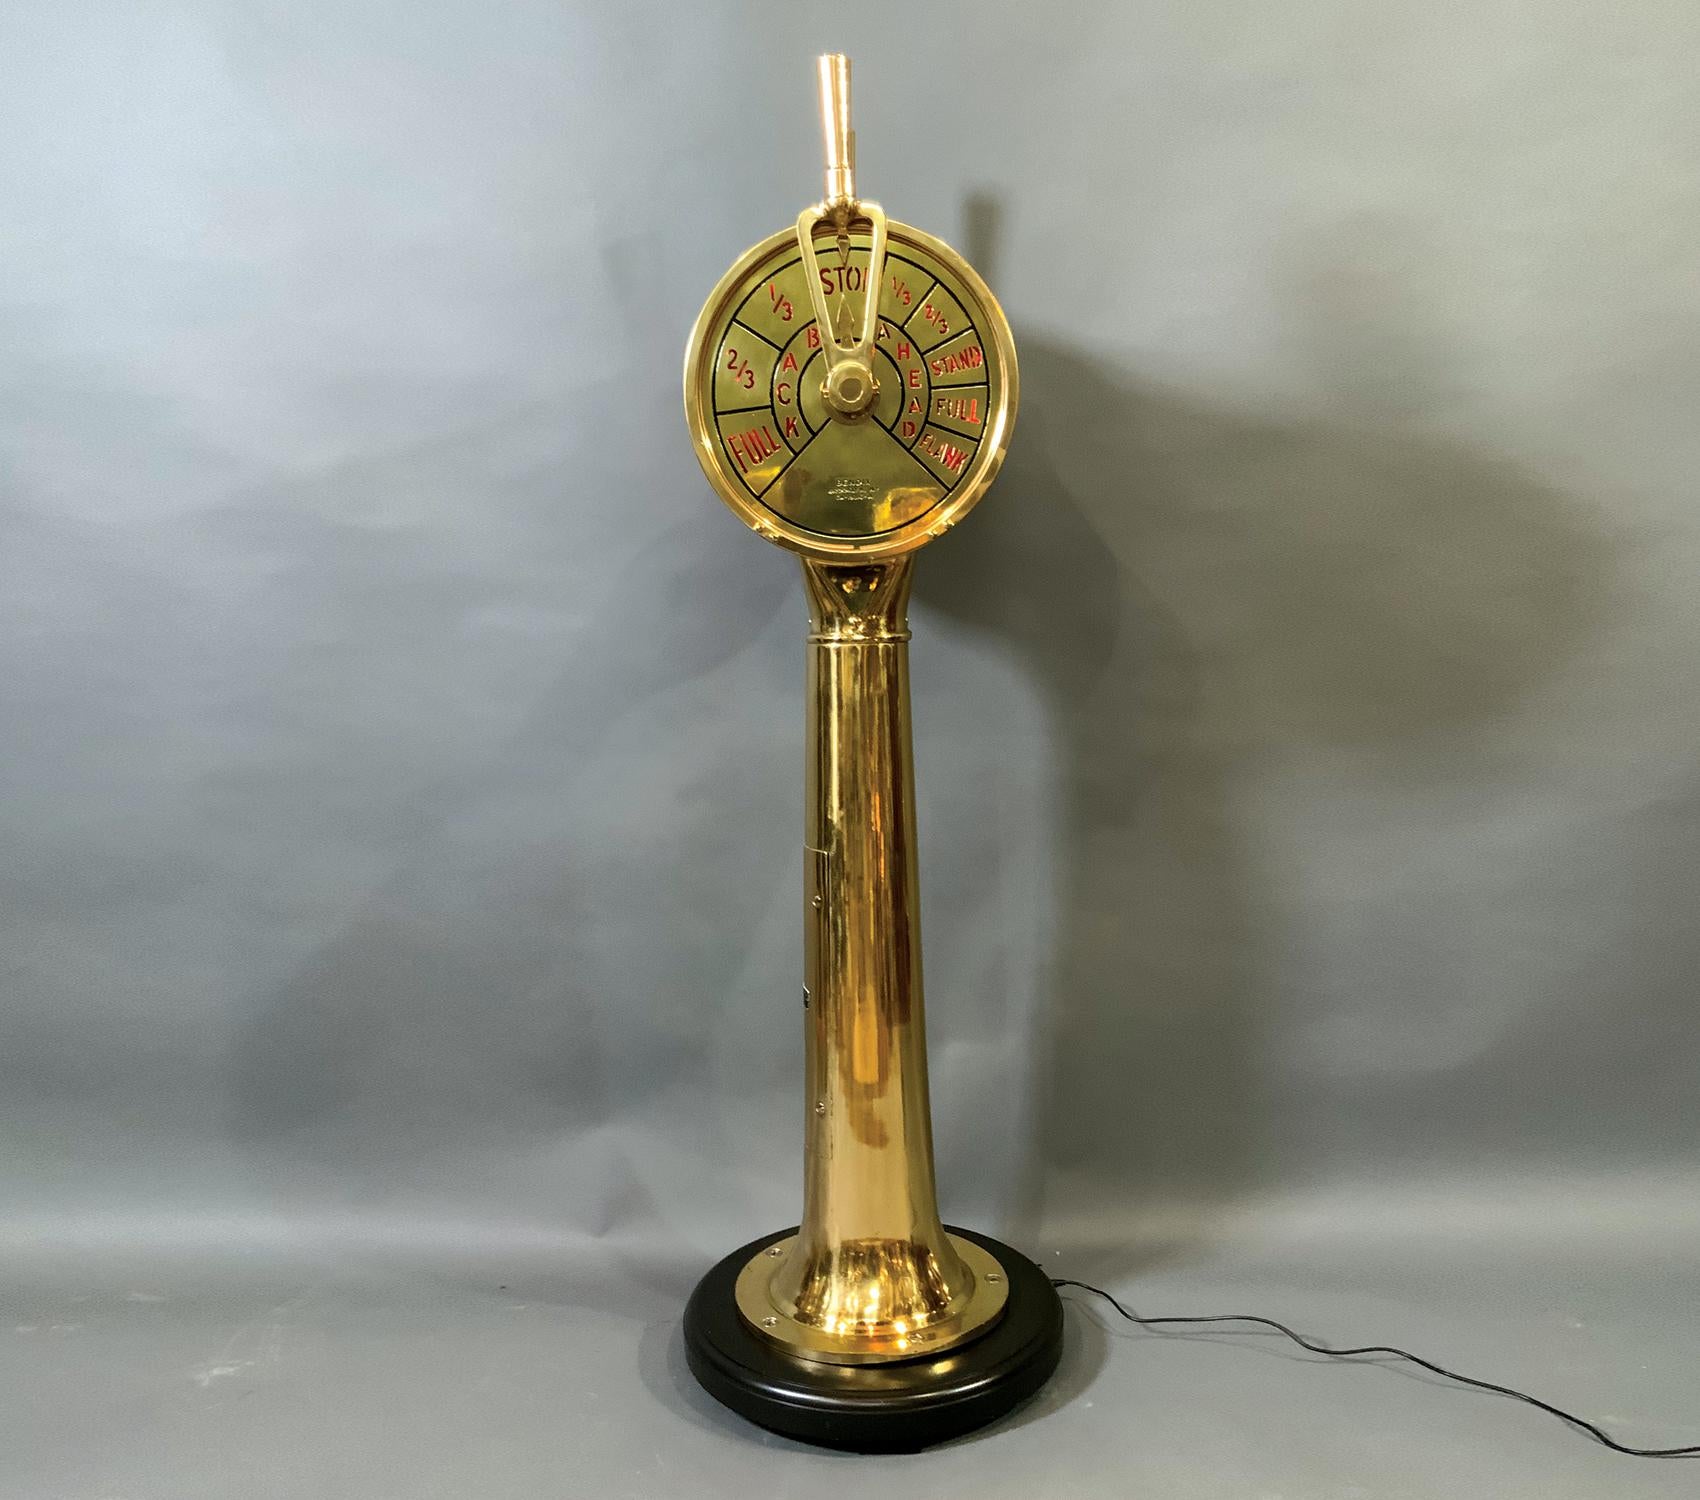 Solid brass ships engine order telegraph by Bendix of Brooklyn New York. This bridge telegraph has been meticulously polished and lacquered. This one also has brass face plates which are quite rare. This telegraph has a radiant glow. Superb maritime